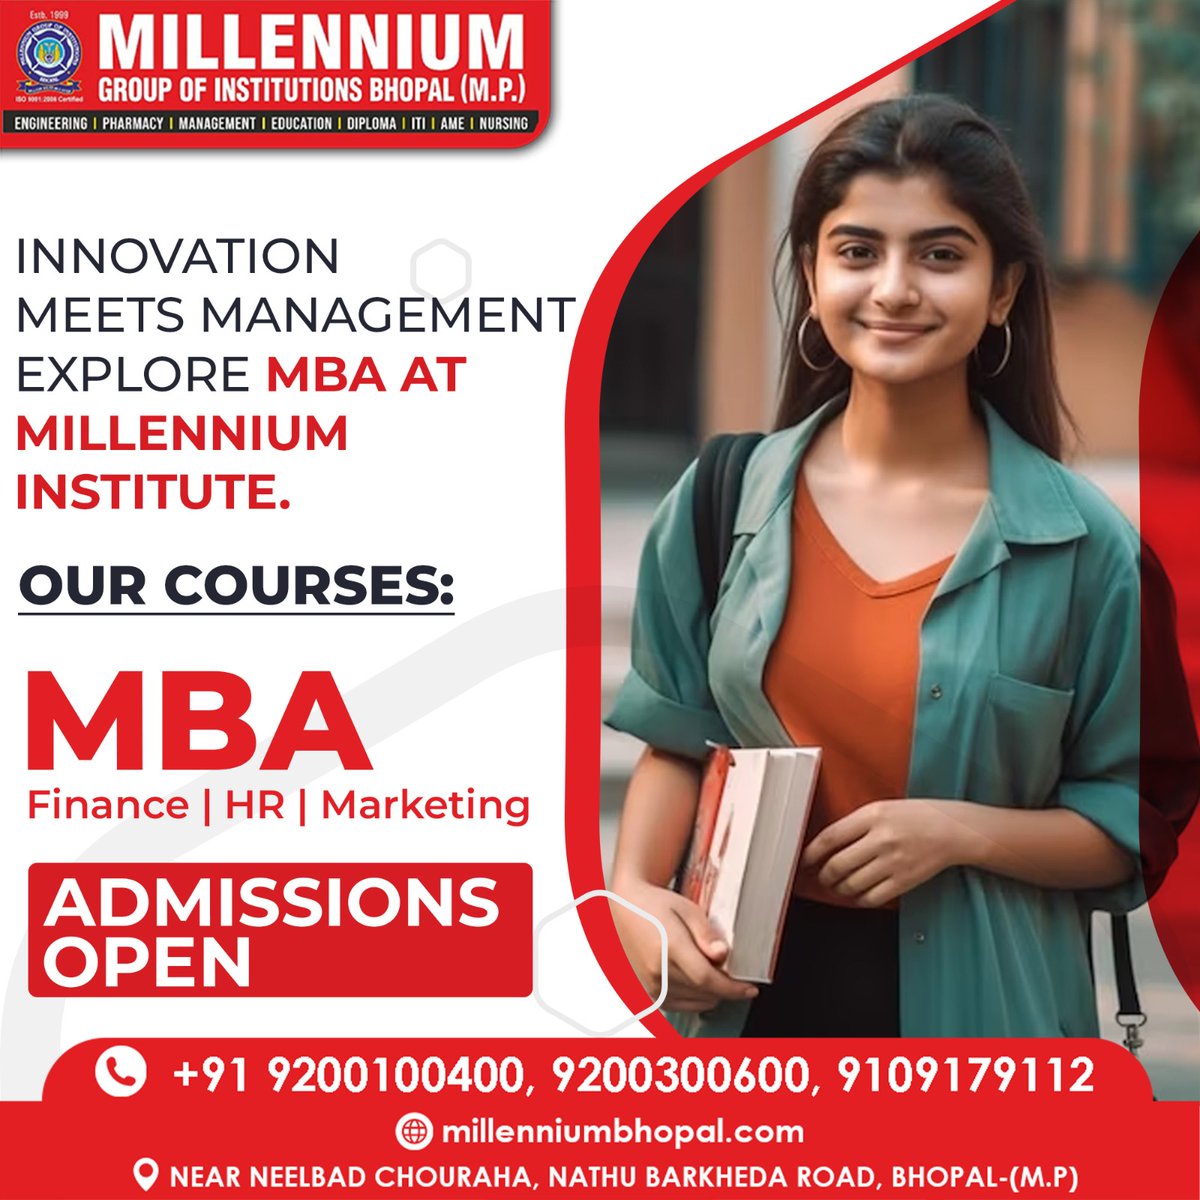 Prepare for a Thriving Career in Business: Apply for MBA Admission at Millennium Group Of Institutions! 📷📷 Your Future in Business Starts Now! #MBAAdmission #BusinessCareer #MillenniumGroupOfInstitutions #MBAAdmission
#MBAAdmissions
#MBA2023
#BusinessSchool
#MBAProgram